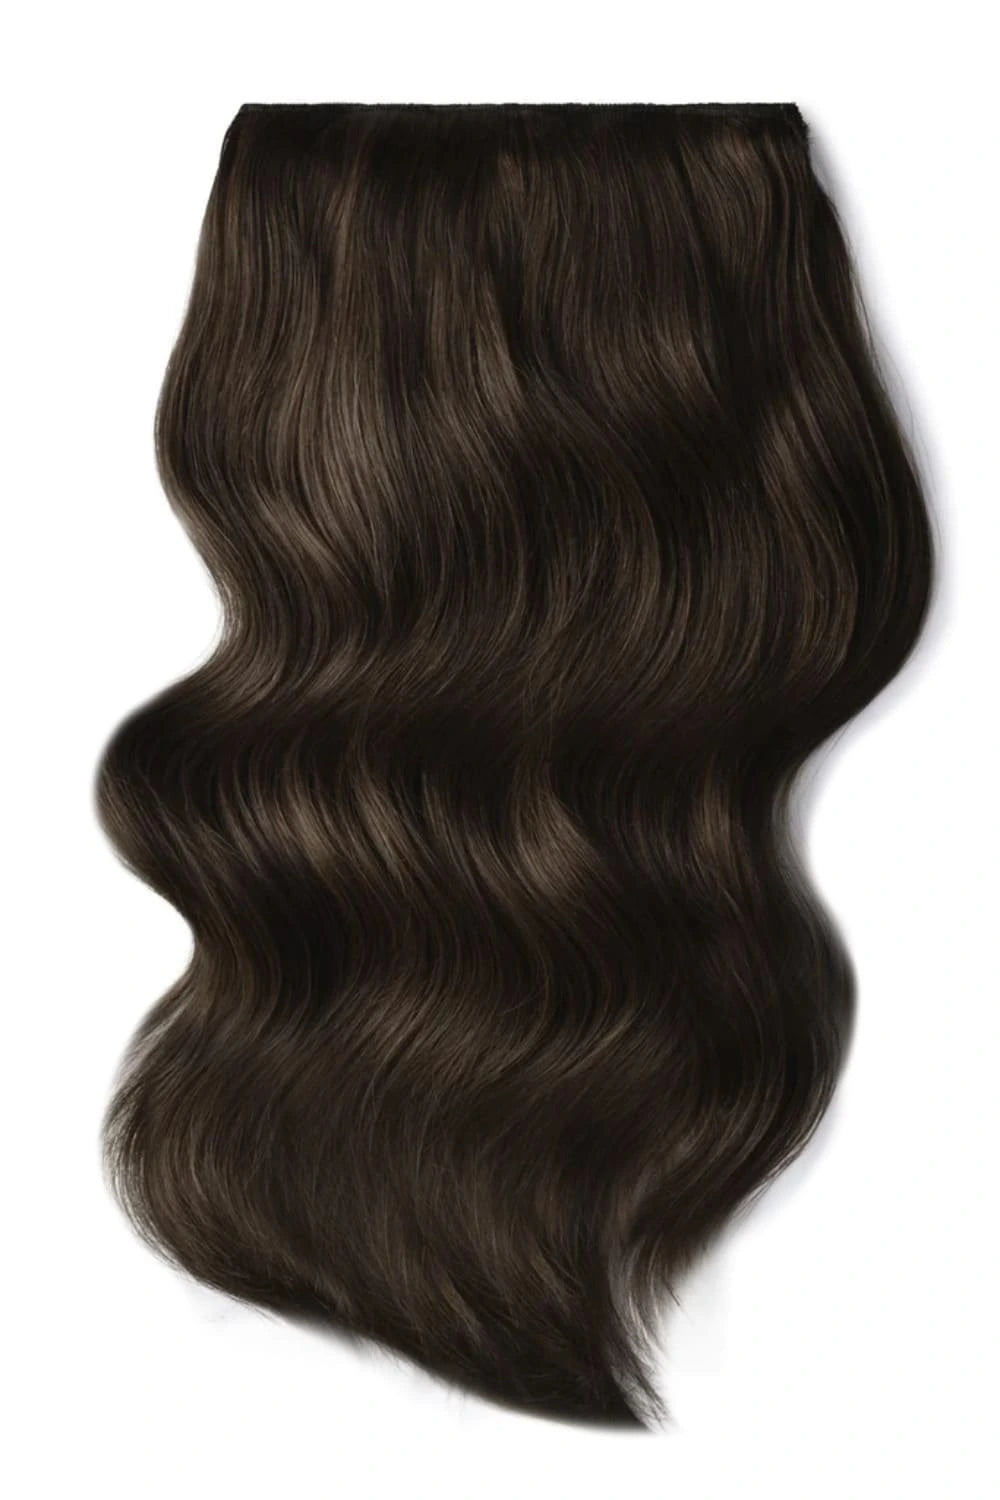 Double Wefted Full Head Remy Clip in Human Hair Extensions - Dark Brown (#3)